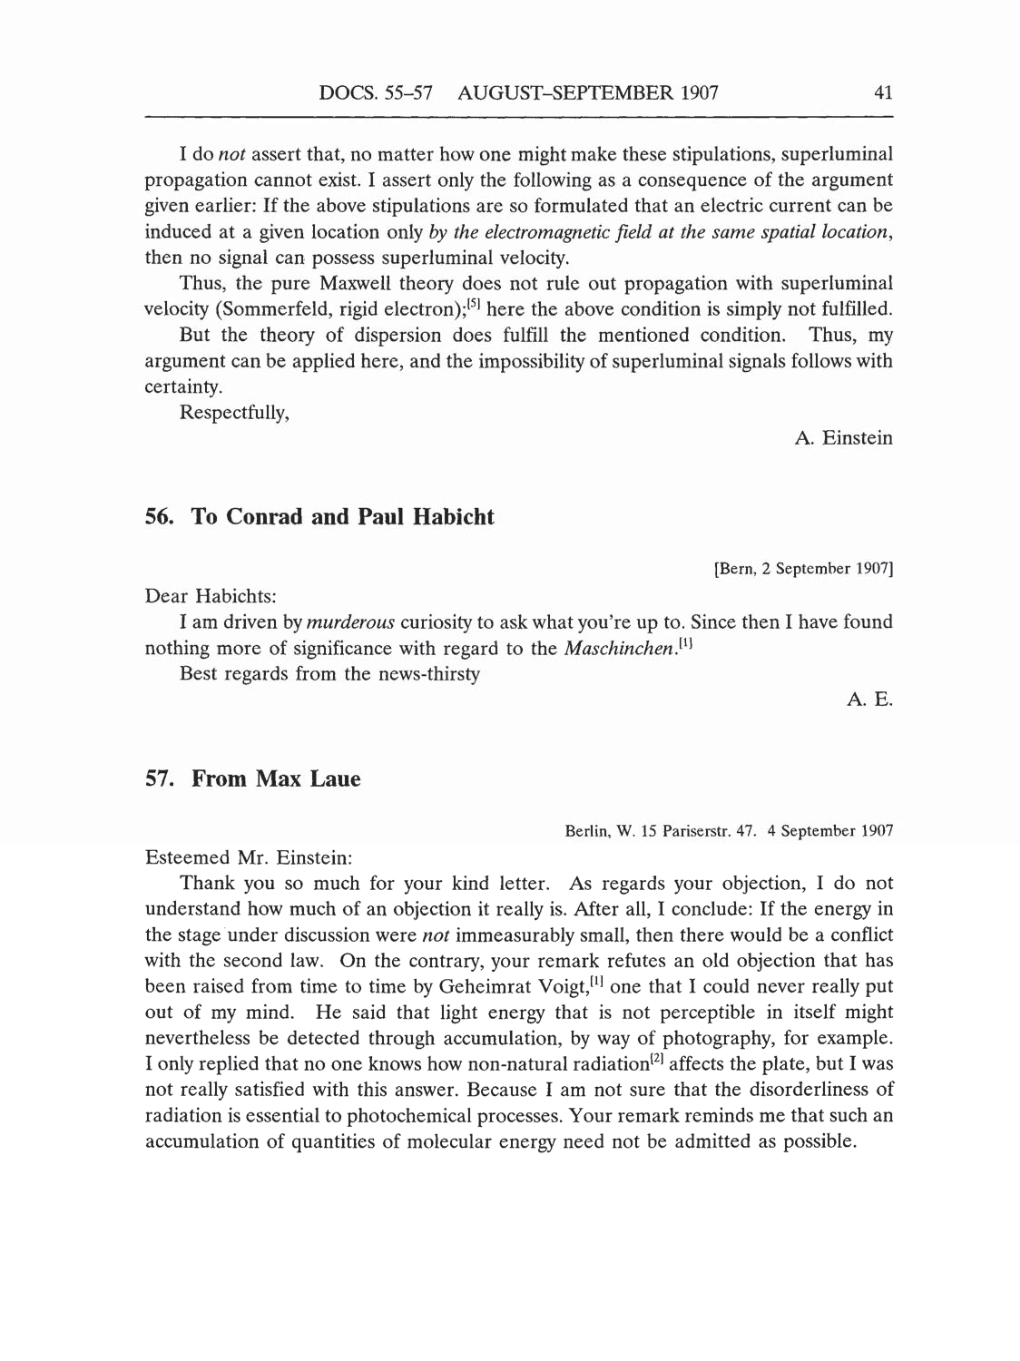 Volume 5: The Swiss Years: Correspondence, 1902-1914 (English translation supplement) page 41